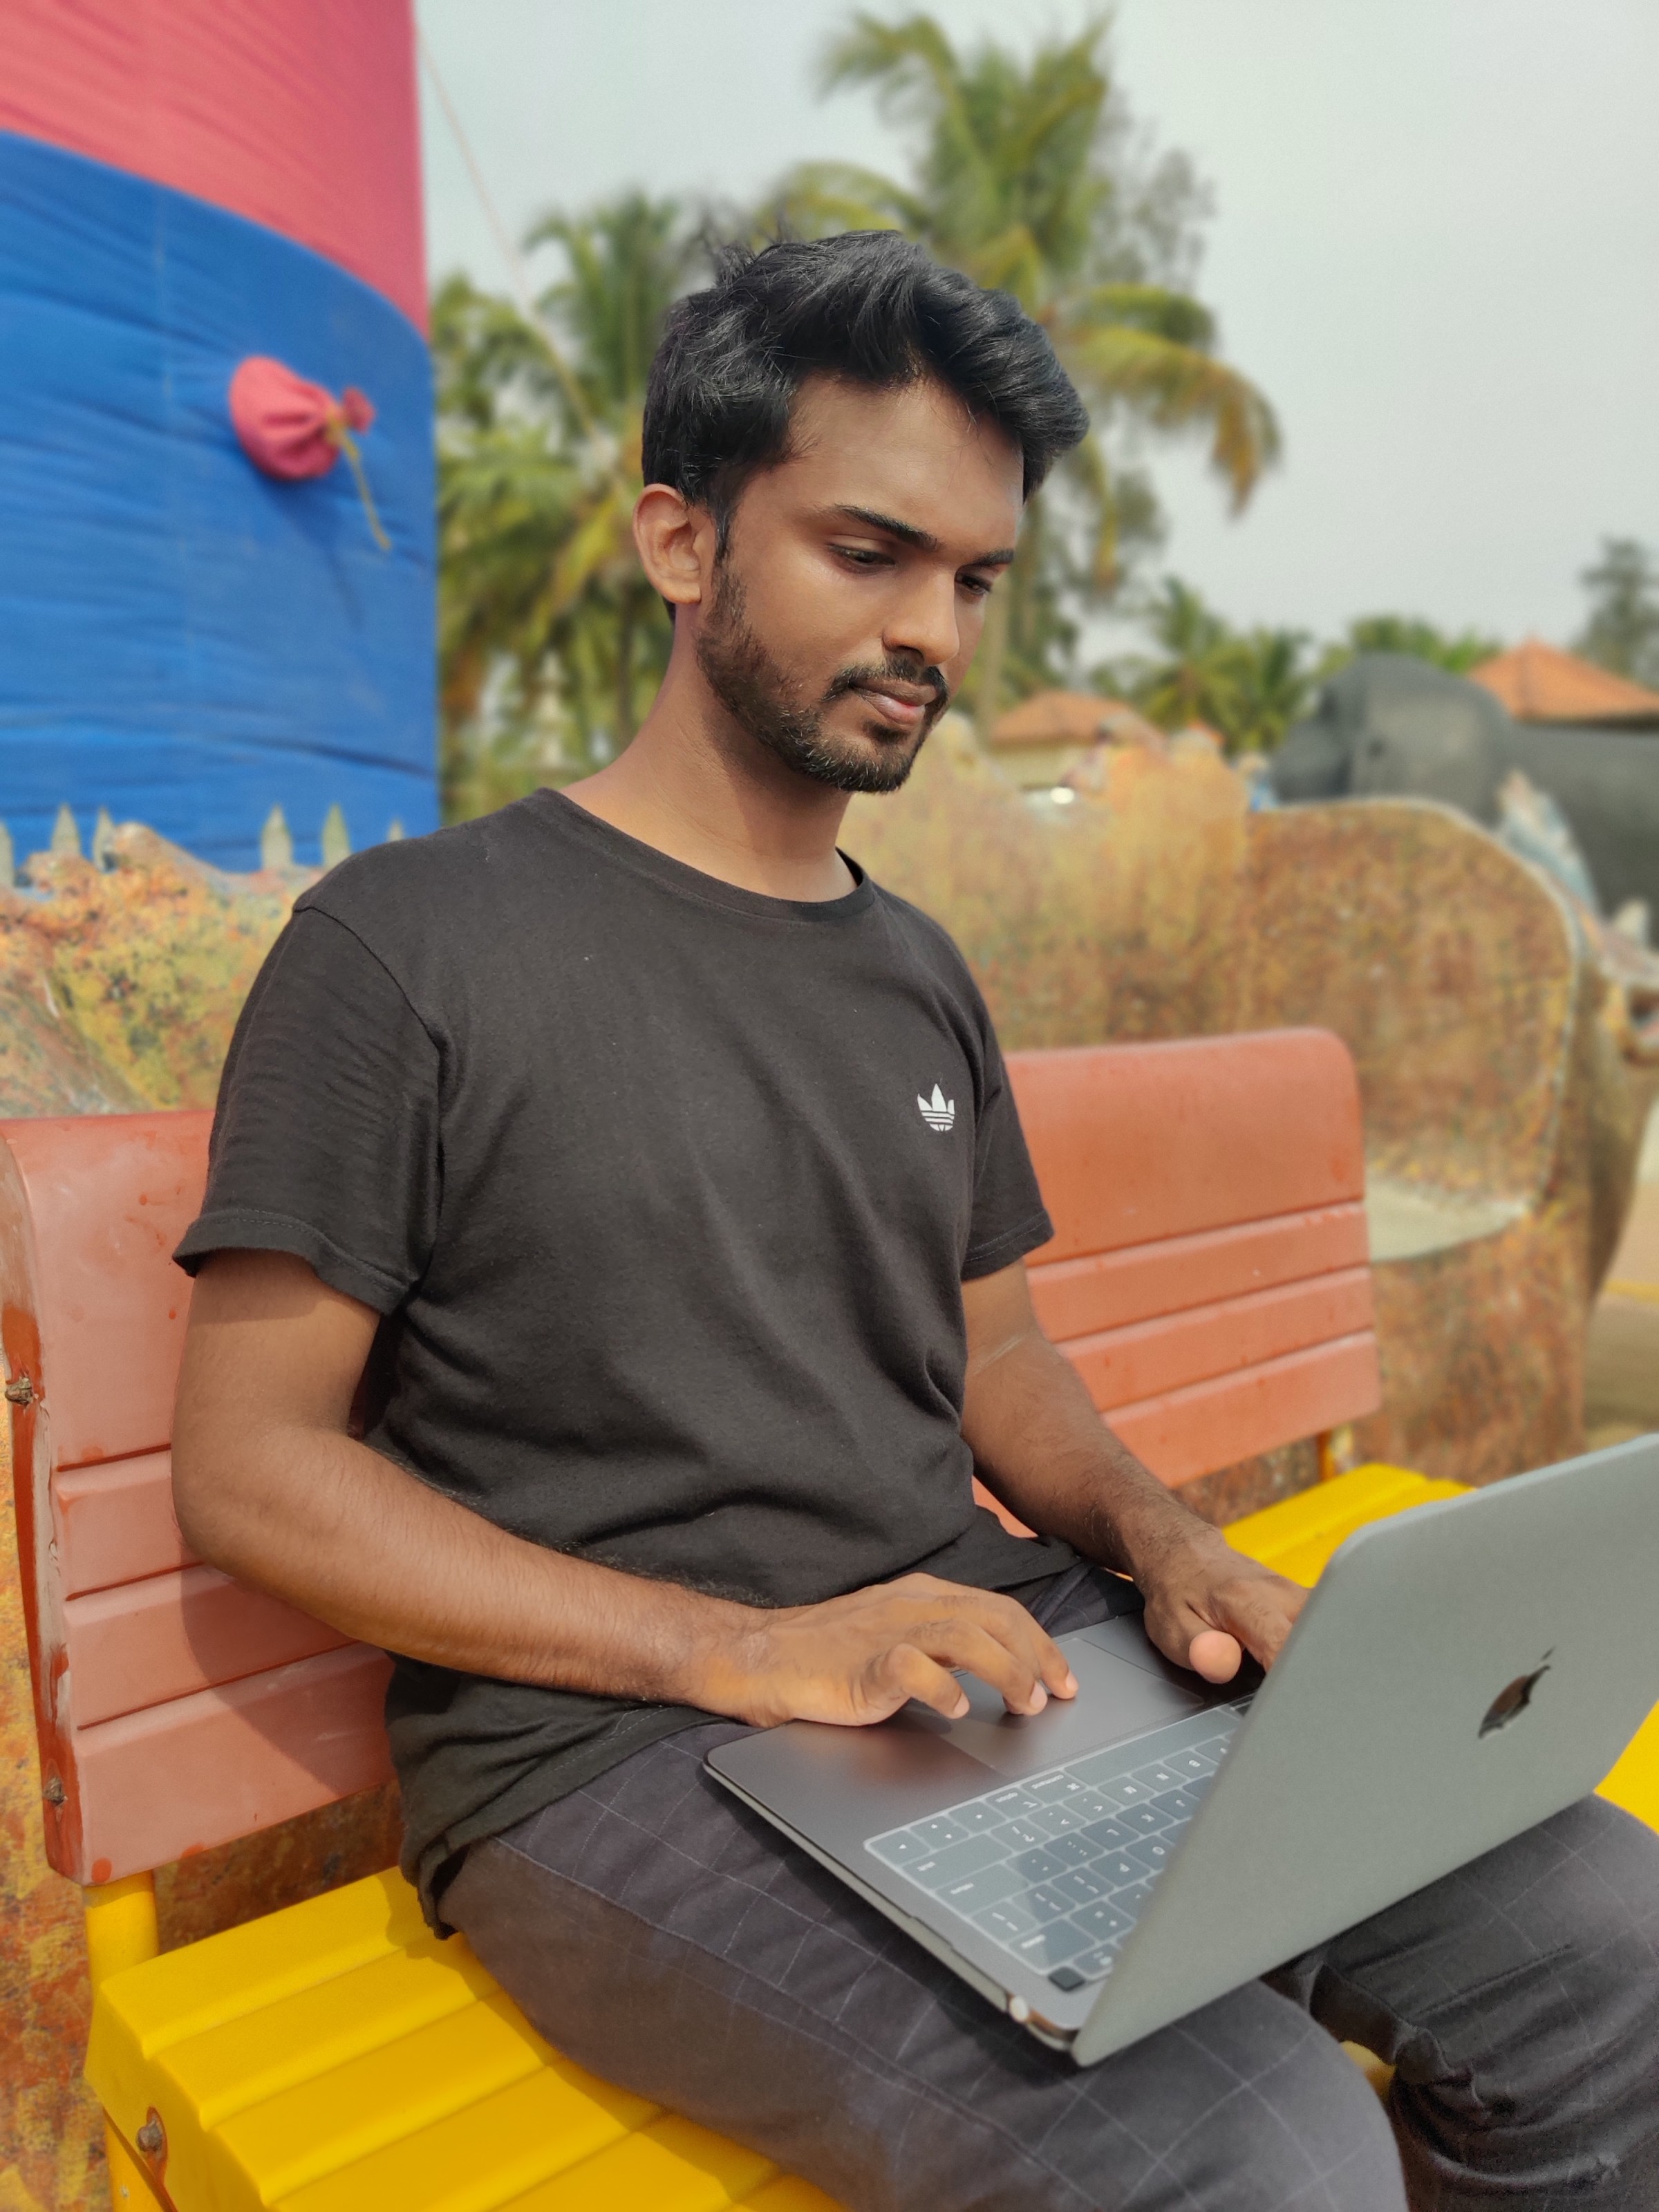 Author Liyas sitting on a colorful outdoor bench working on his laptop